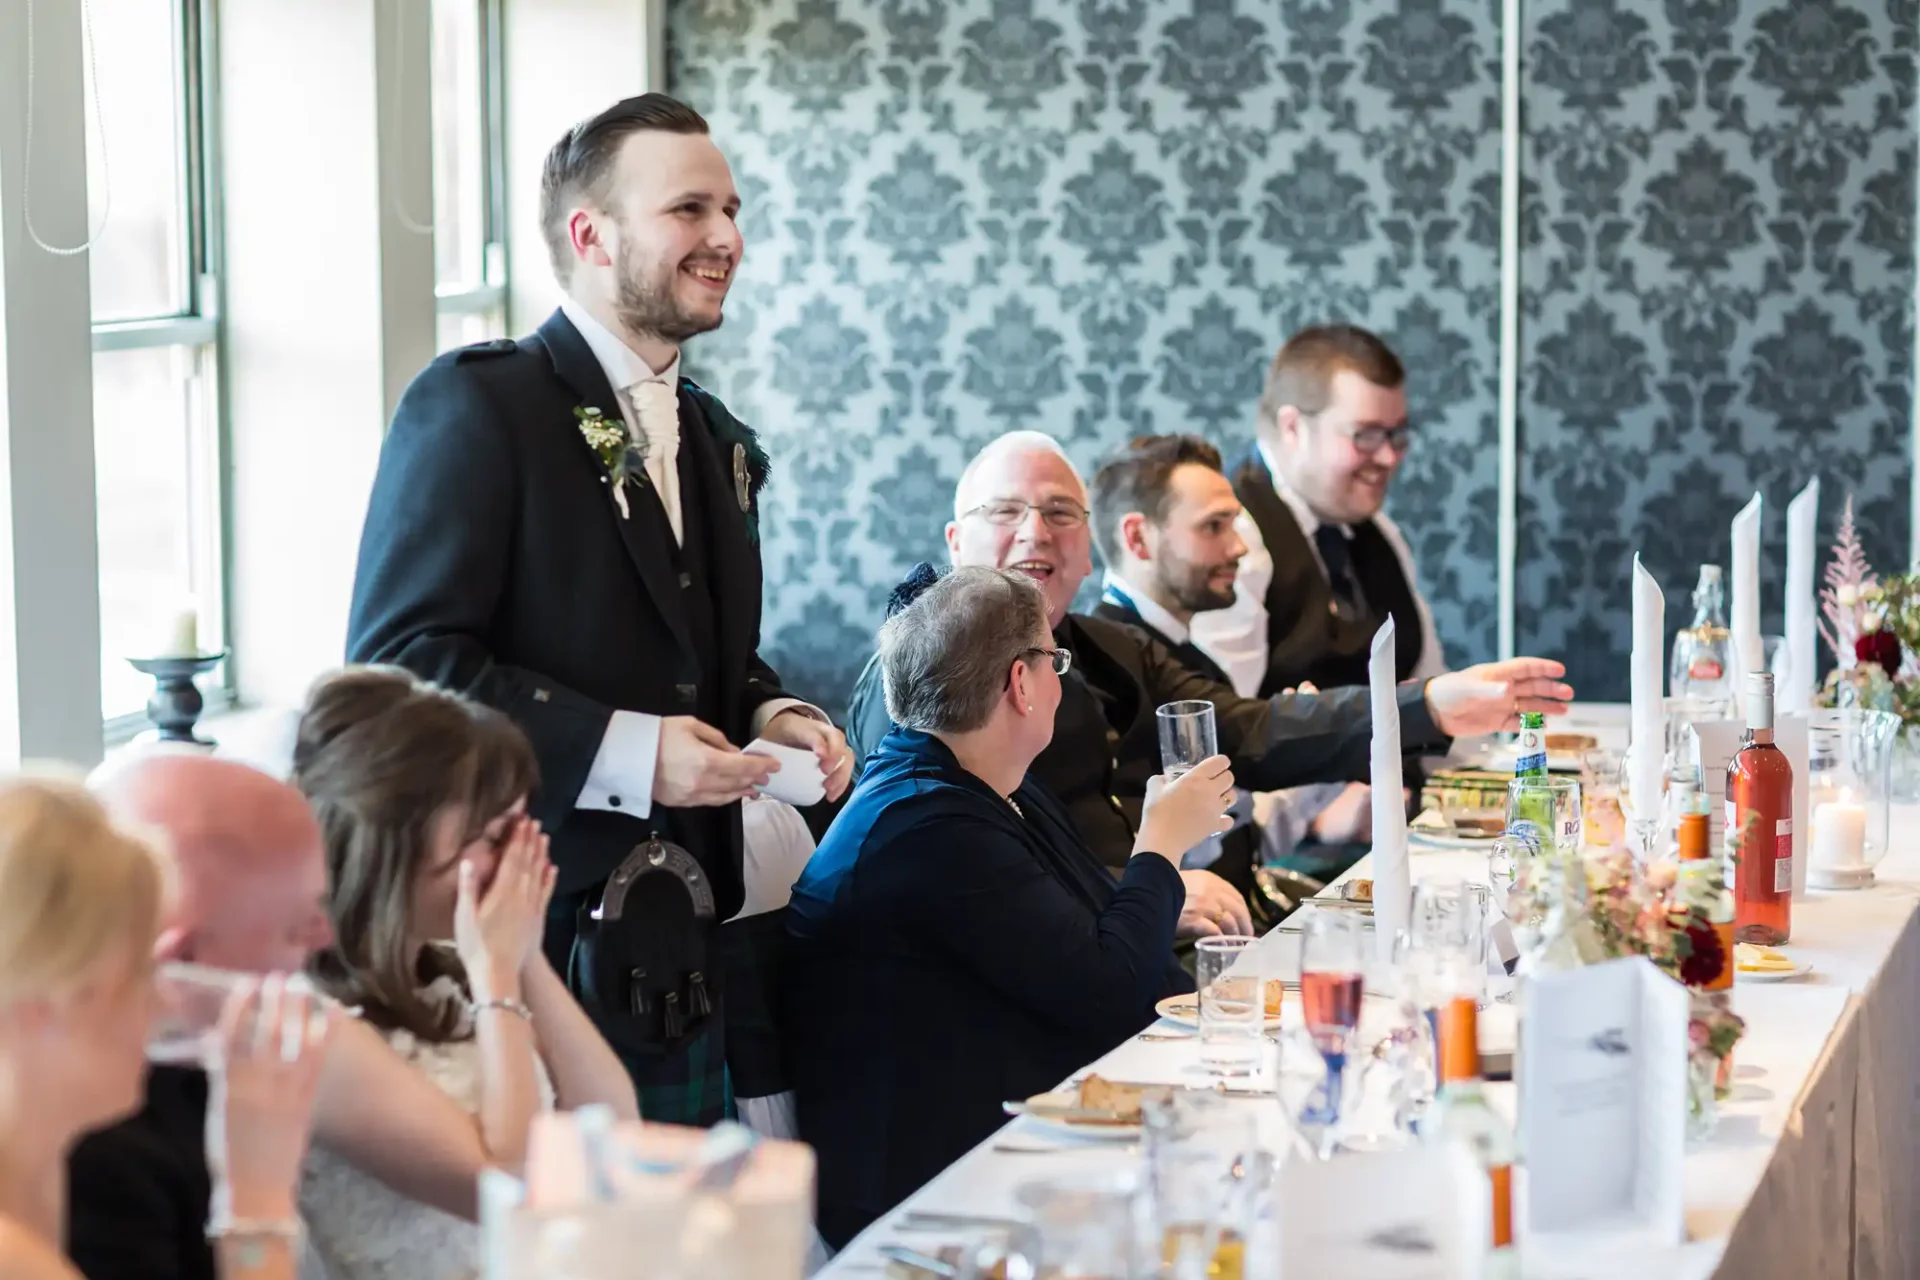 Groom smiling and standing beside seated guests enjoying a toast at a wedding reception table.